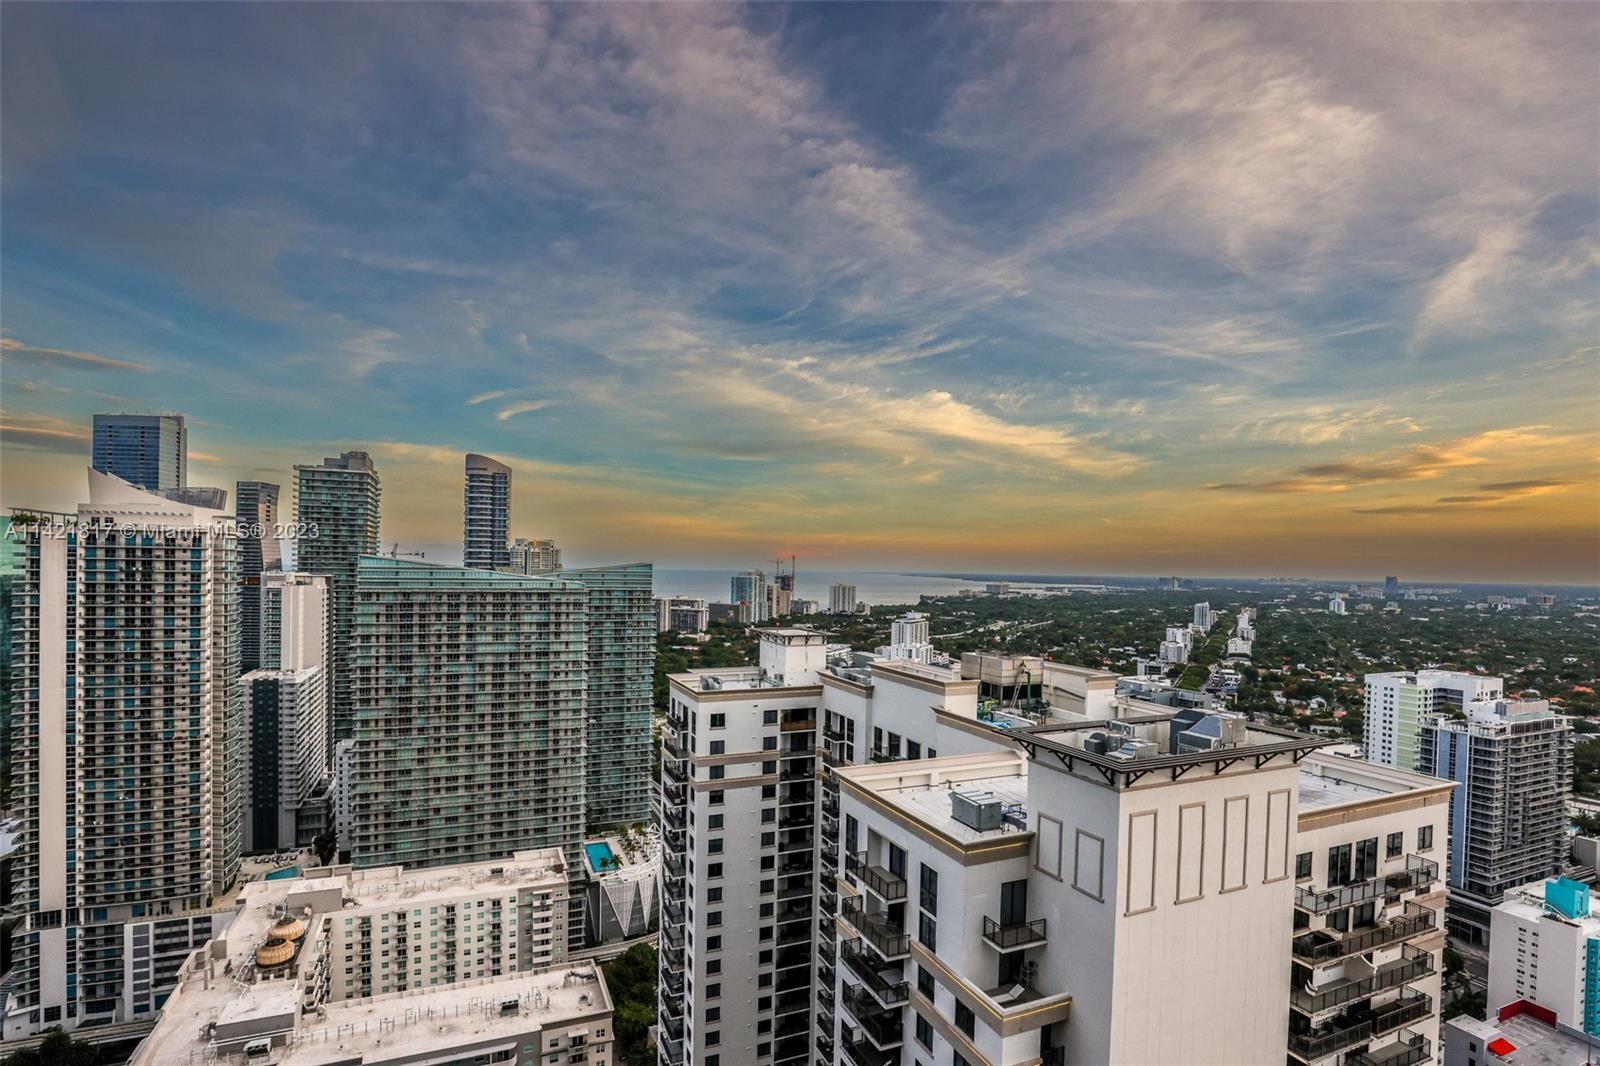 Brickell Heights West Tower image #10